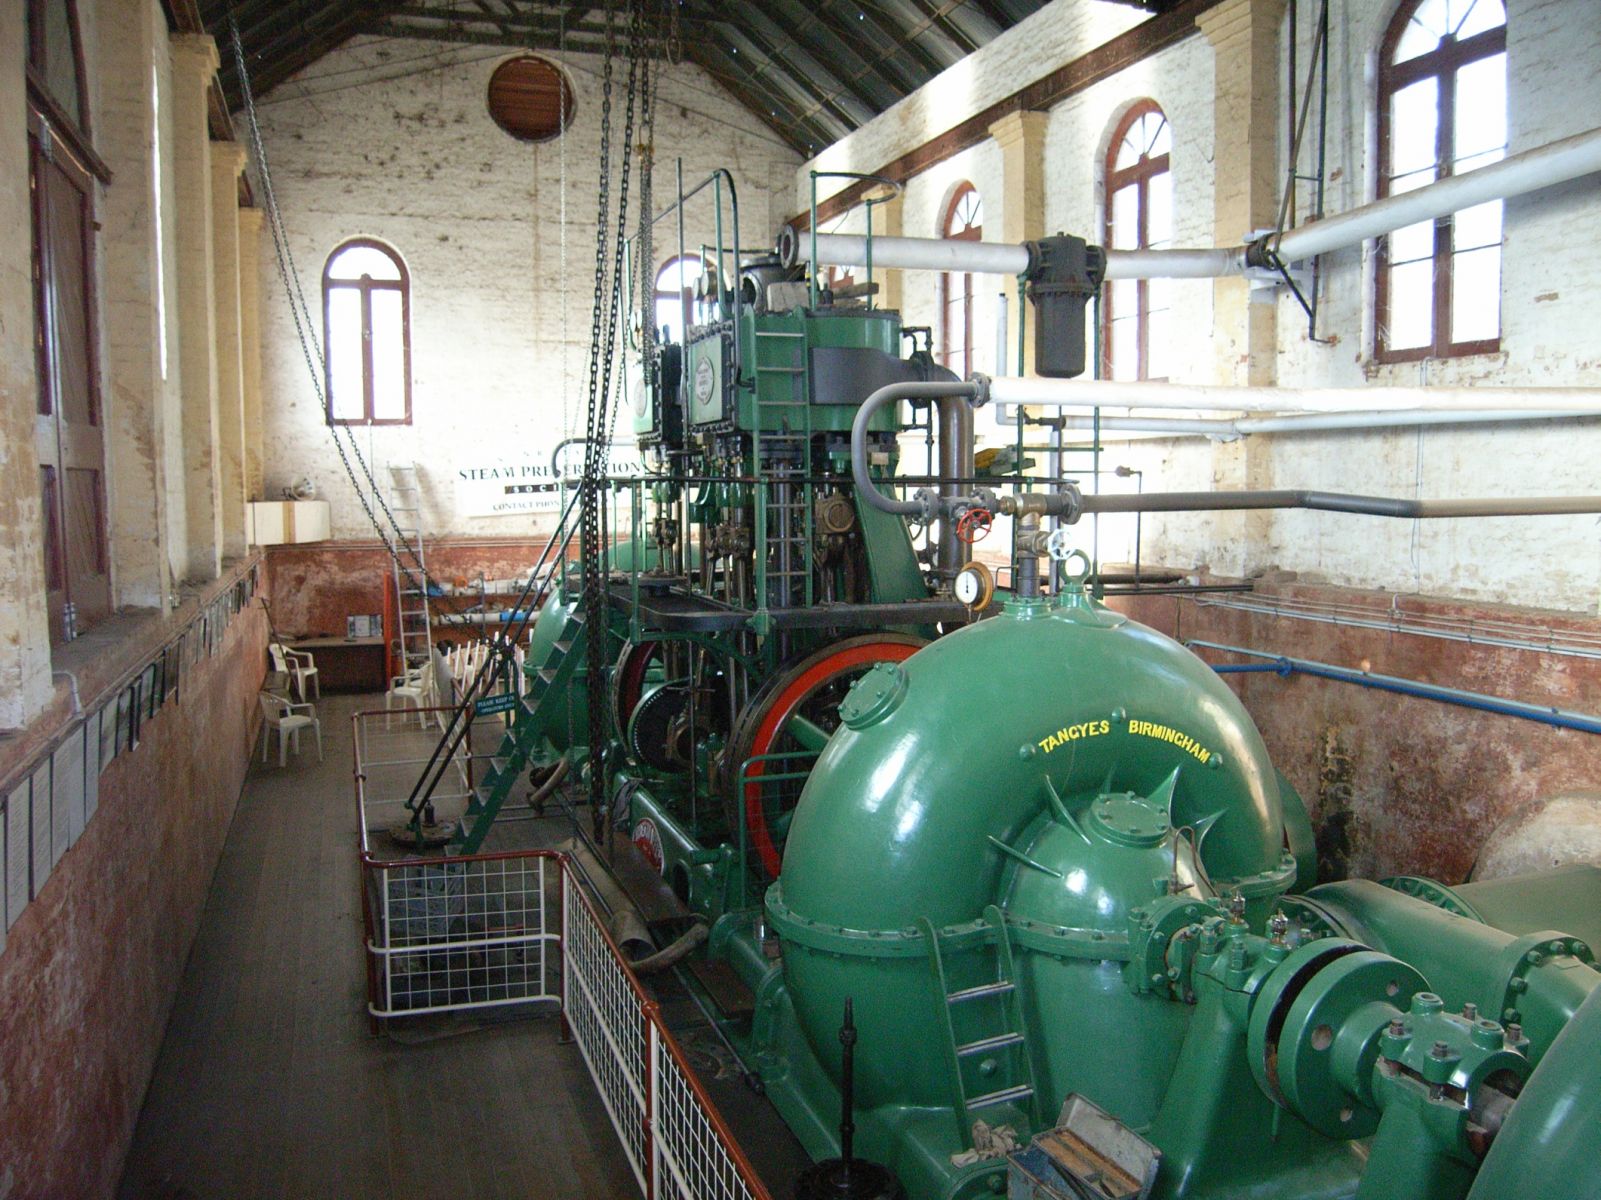 Psyche Bend station pump, the pump is large and green in colour and is held within a room.